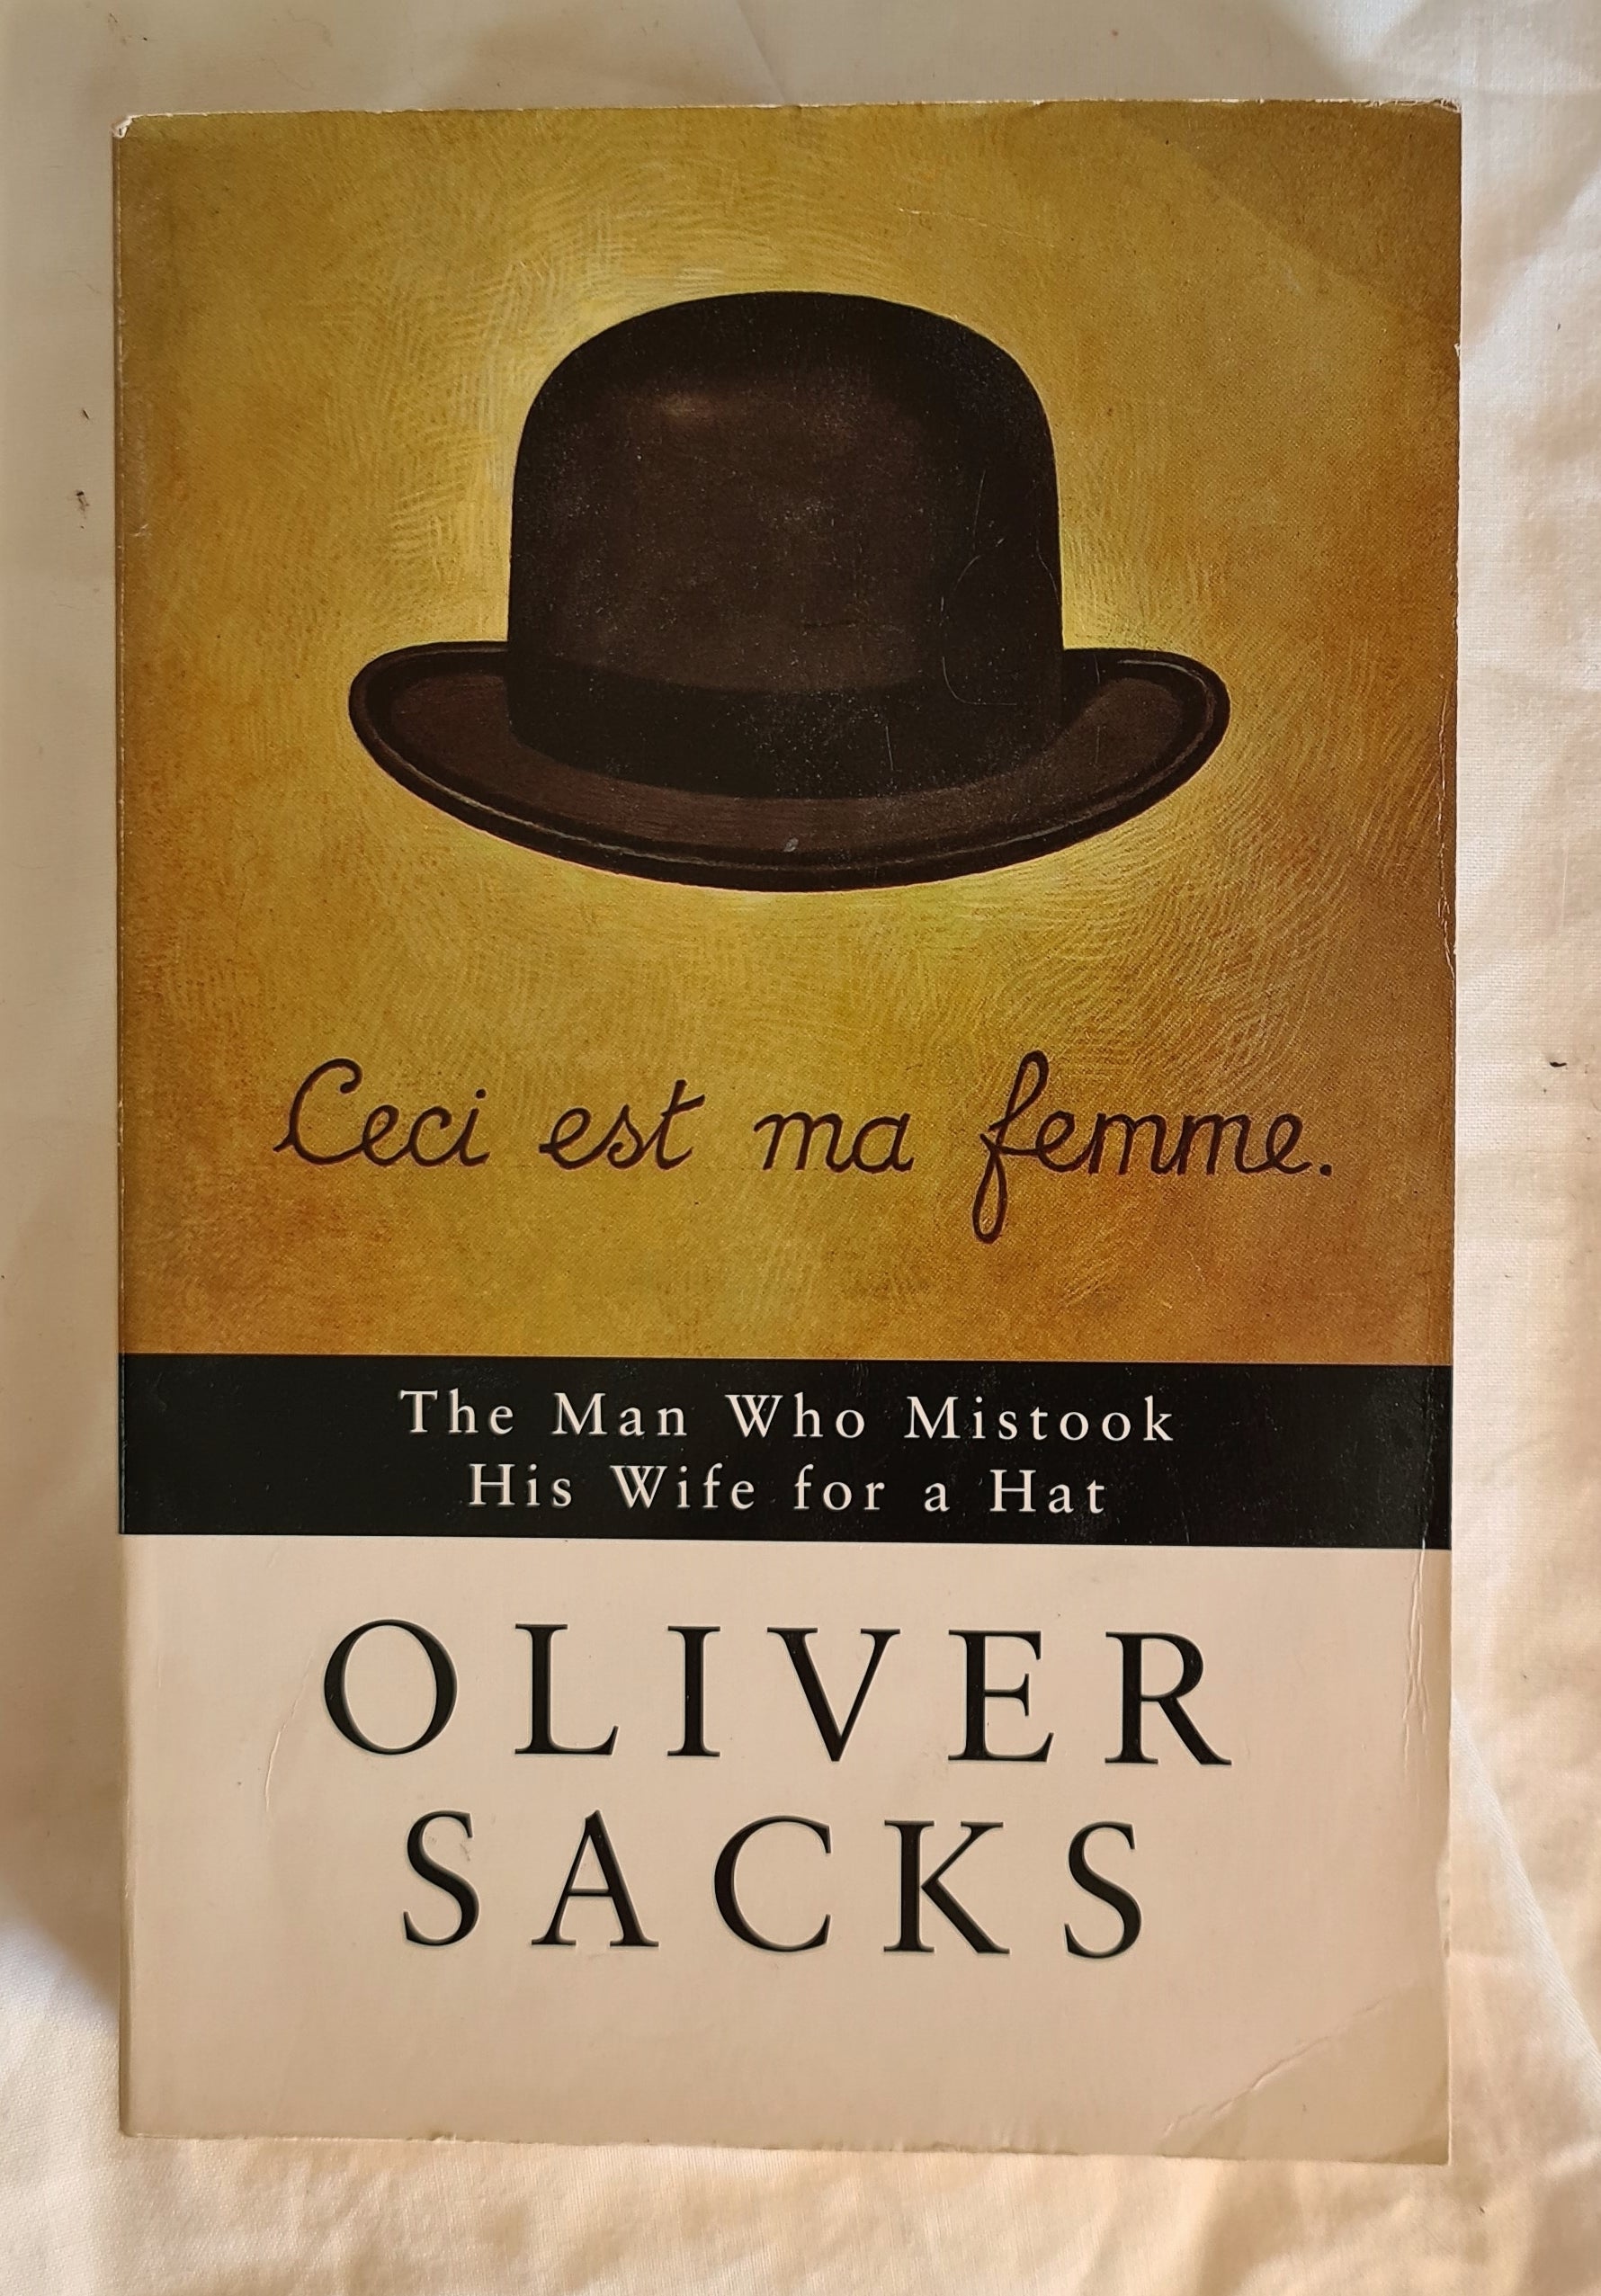 The Man Who Mistook His Wife for a Hat  by Oliver Sacks